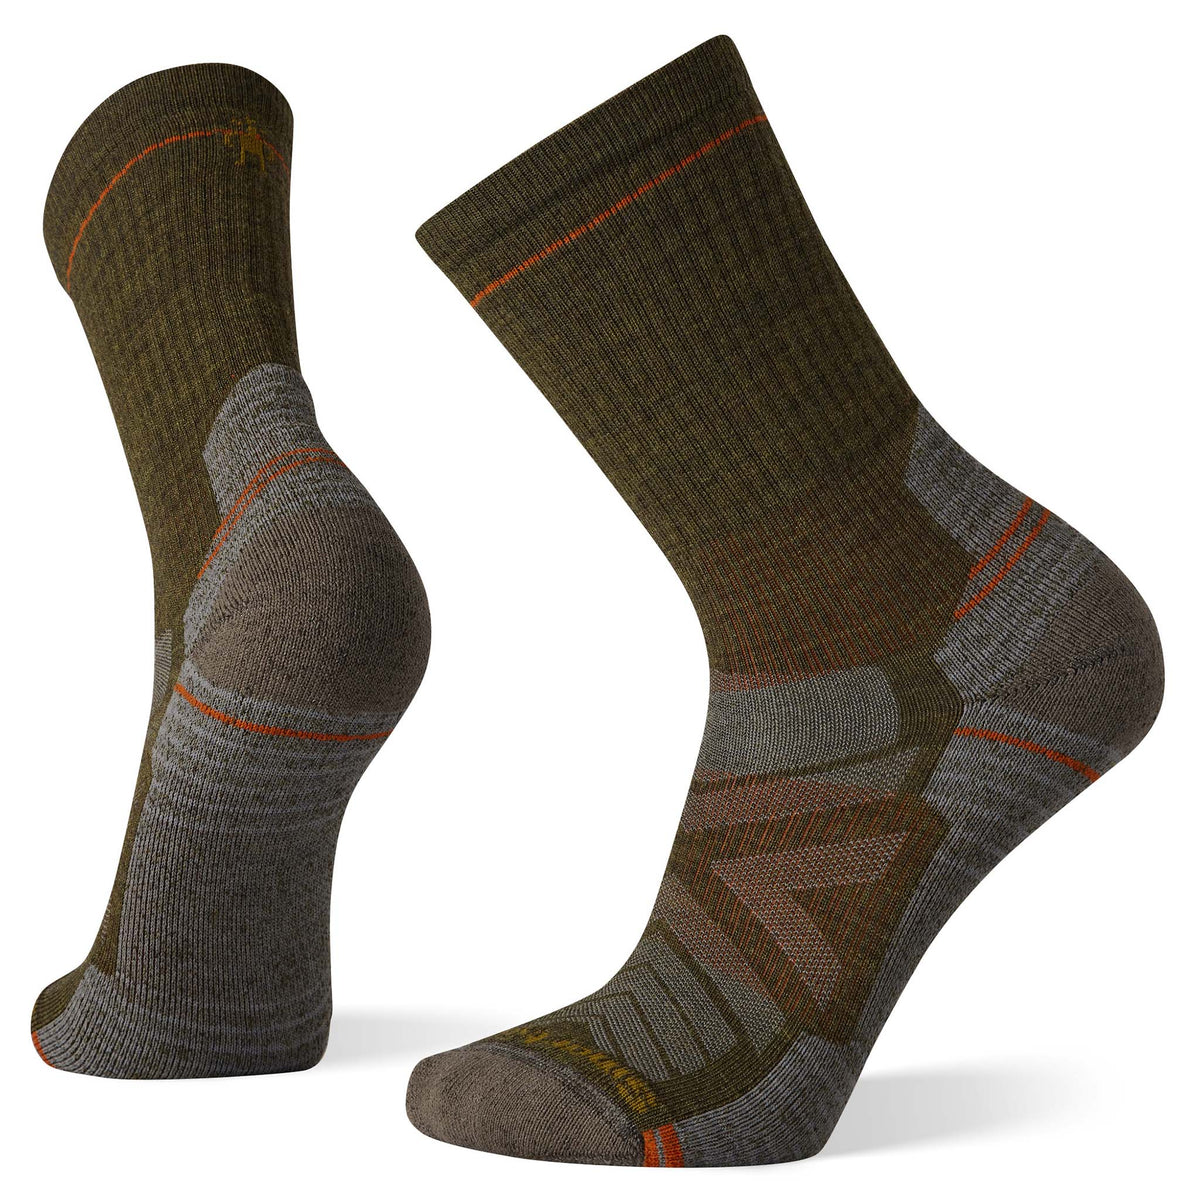 Smartwool Performance Hike Light Cushion chaussettes olive militaire homme